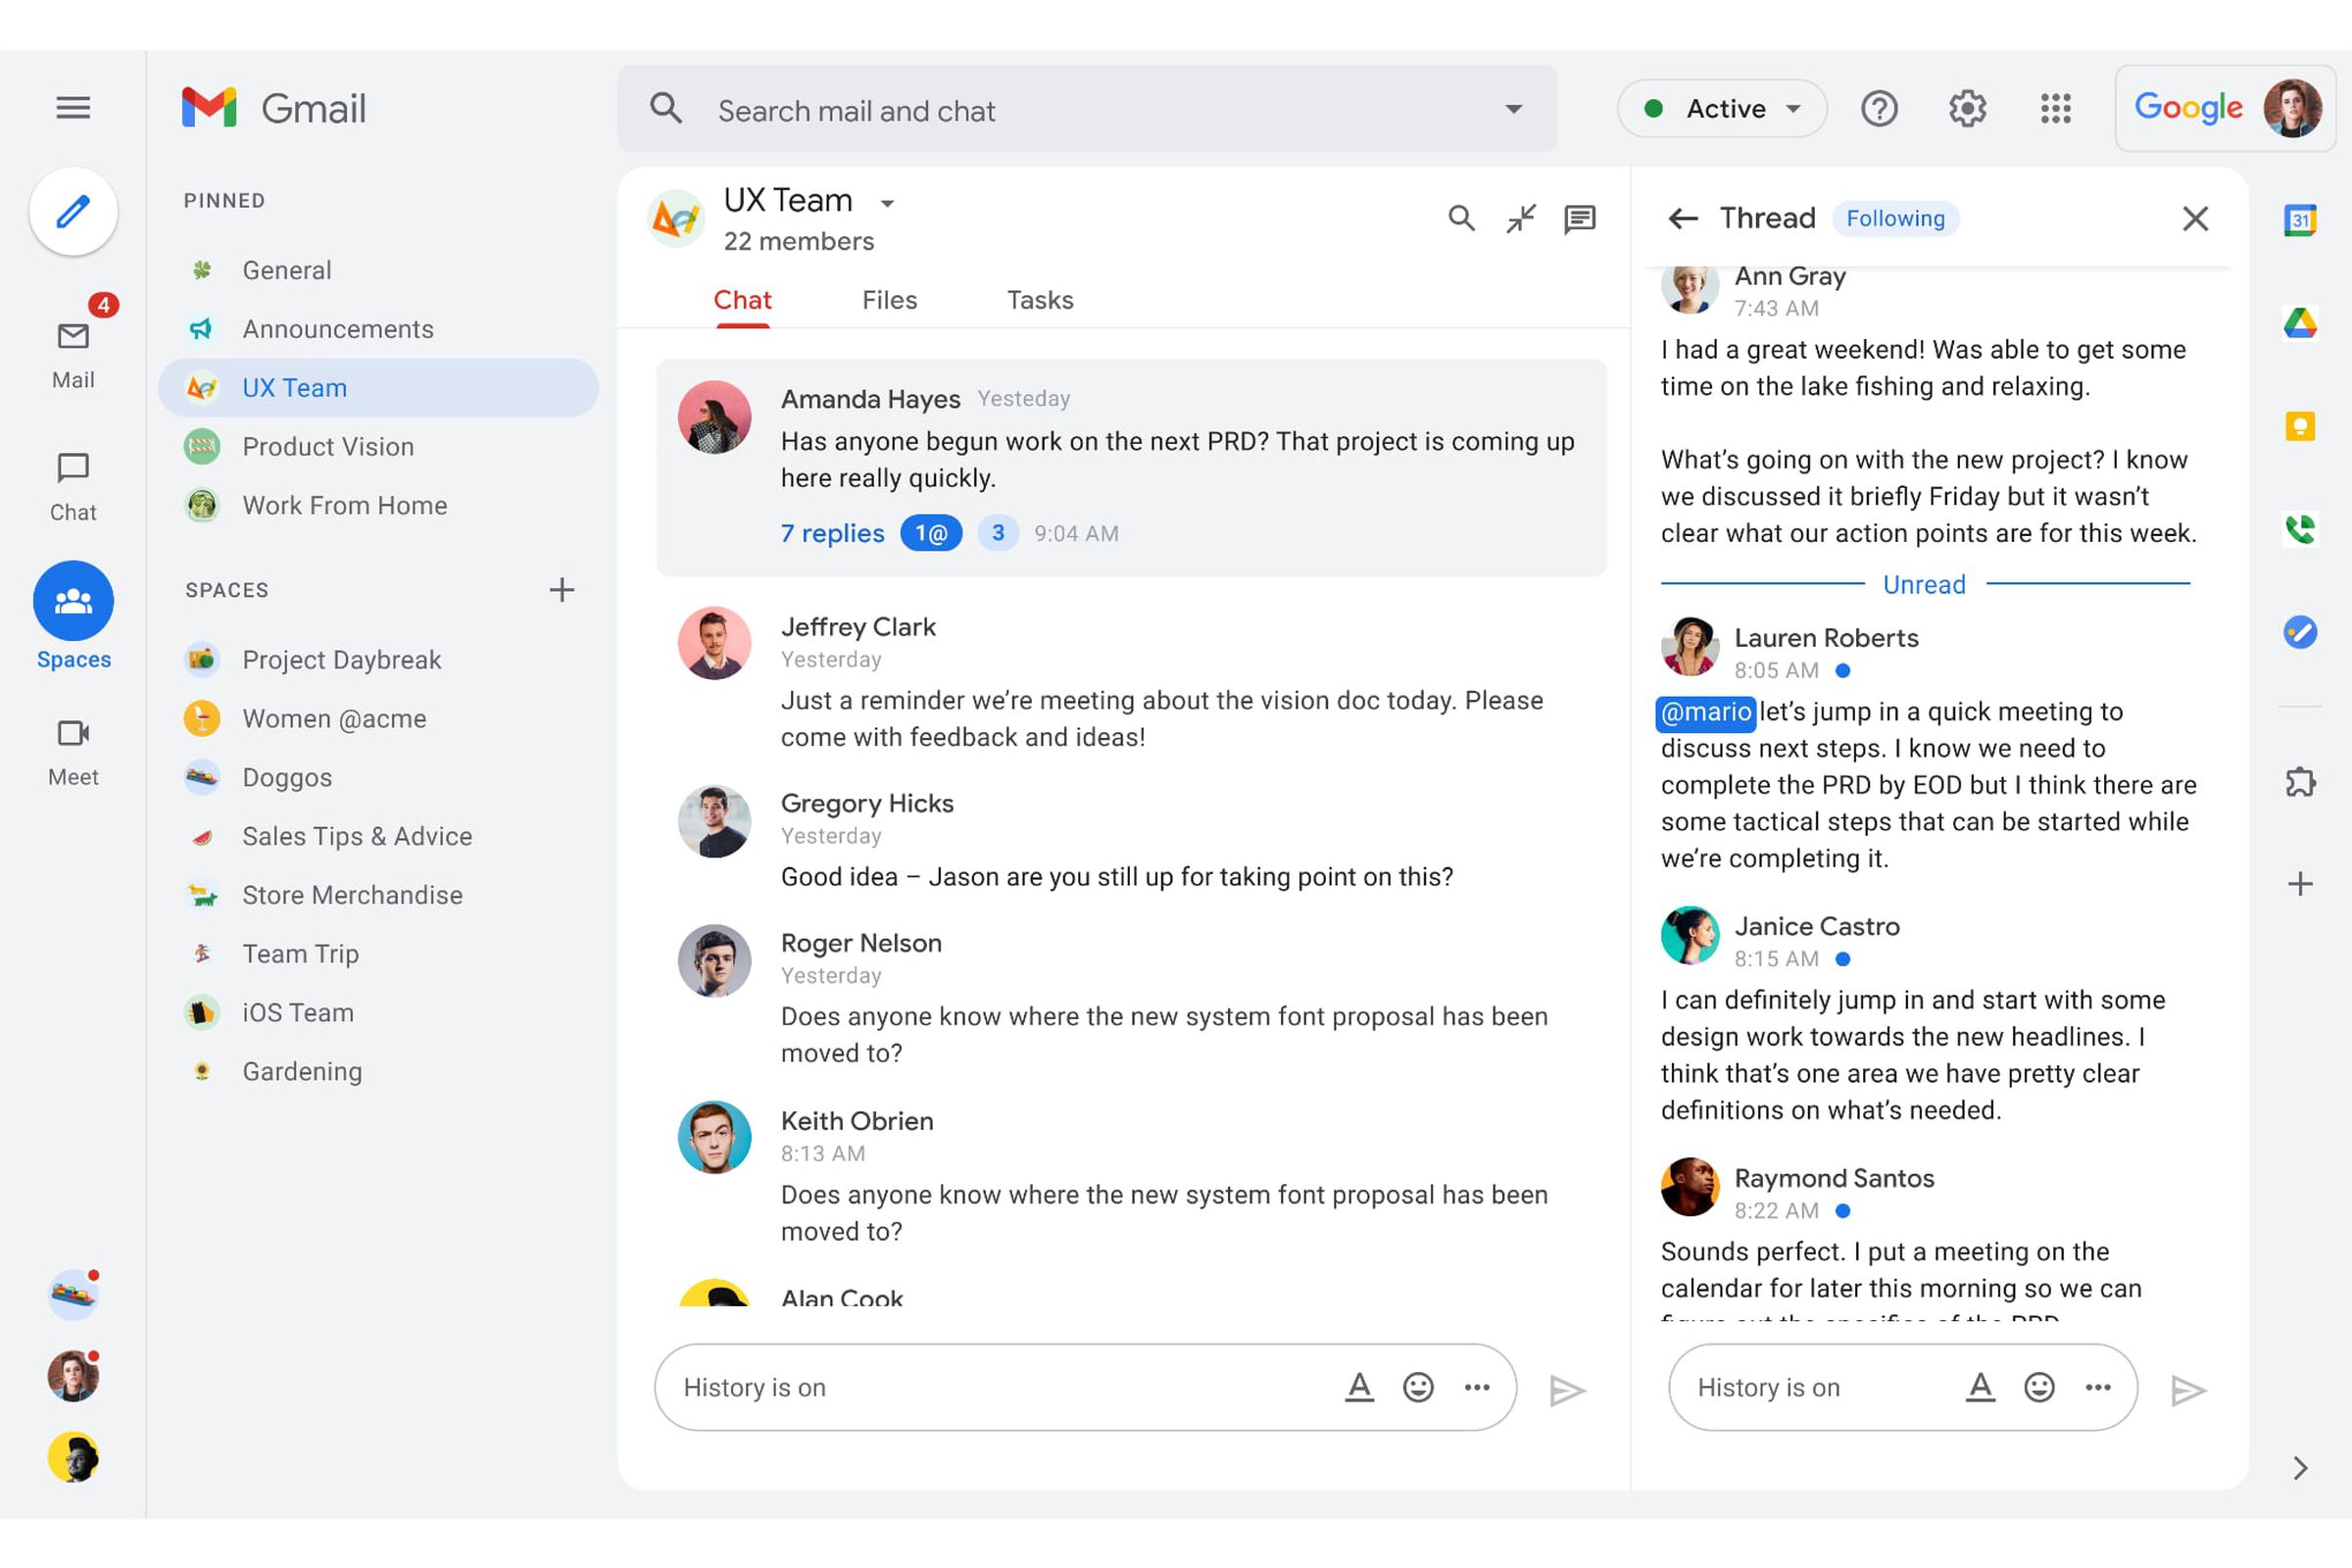 The new Gmail design, with Google Spaces